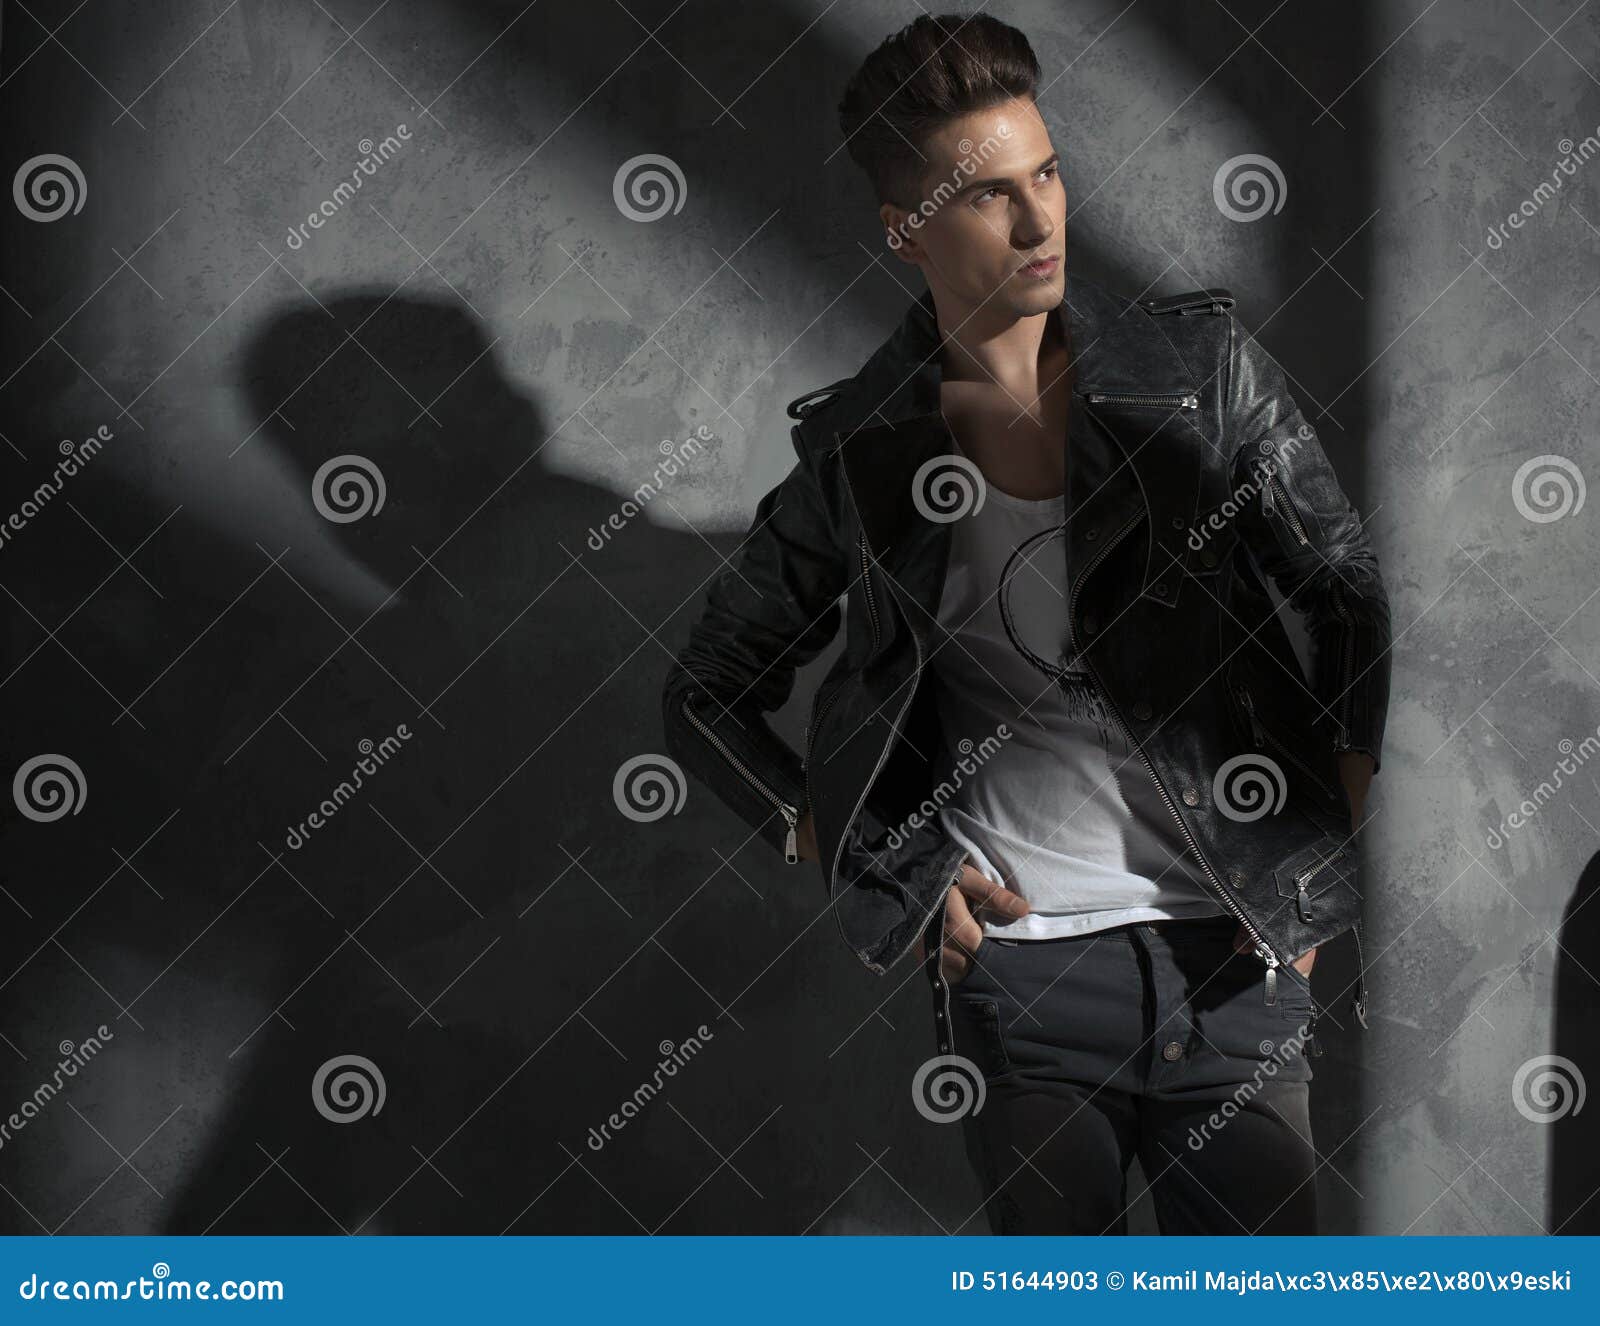 Portrait of a Handsome Male Model Stock Image - Image of happy, male ...